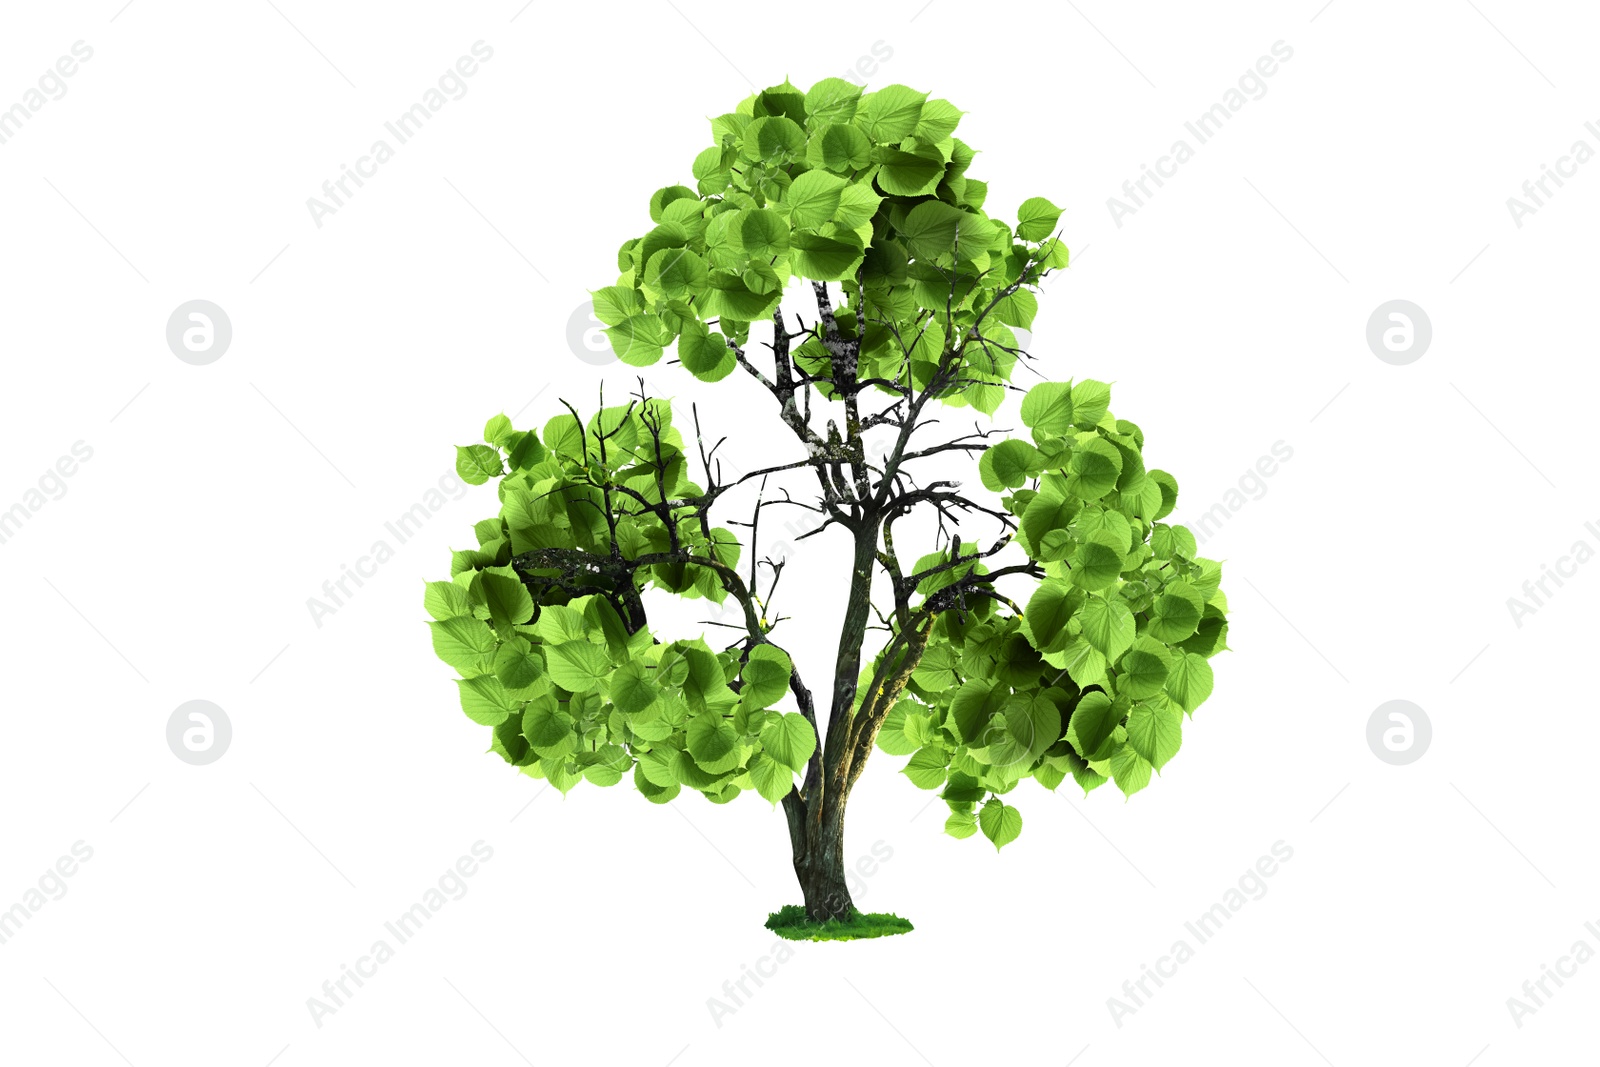 Image of Tree with green leaves in shape of recycling symbol on white background